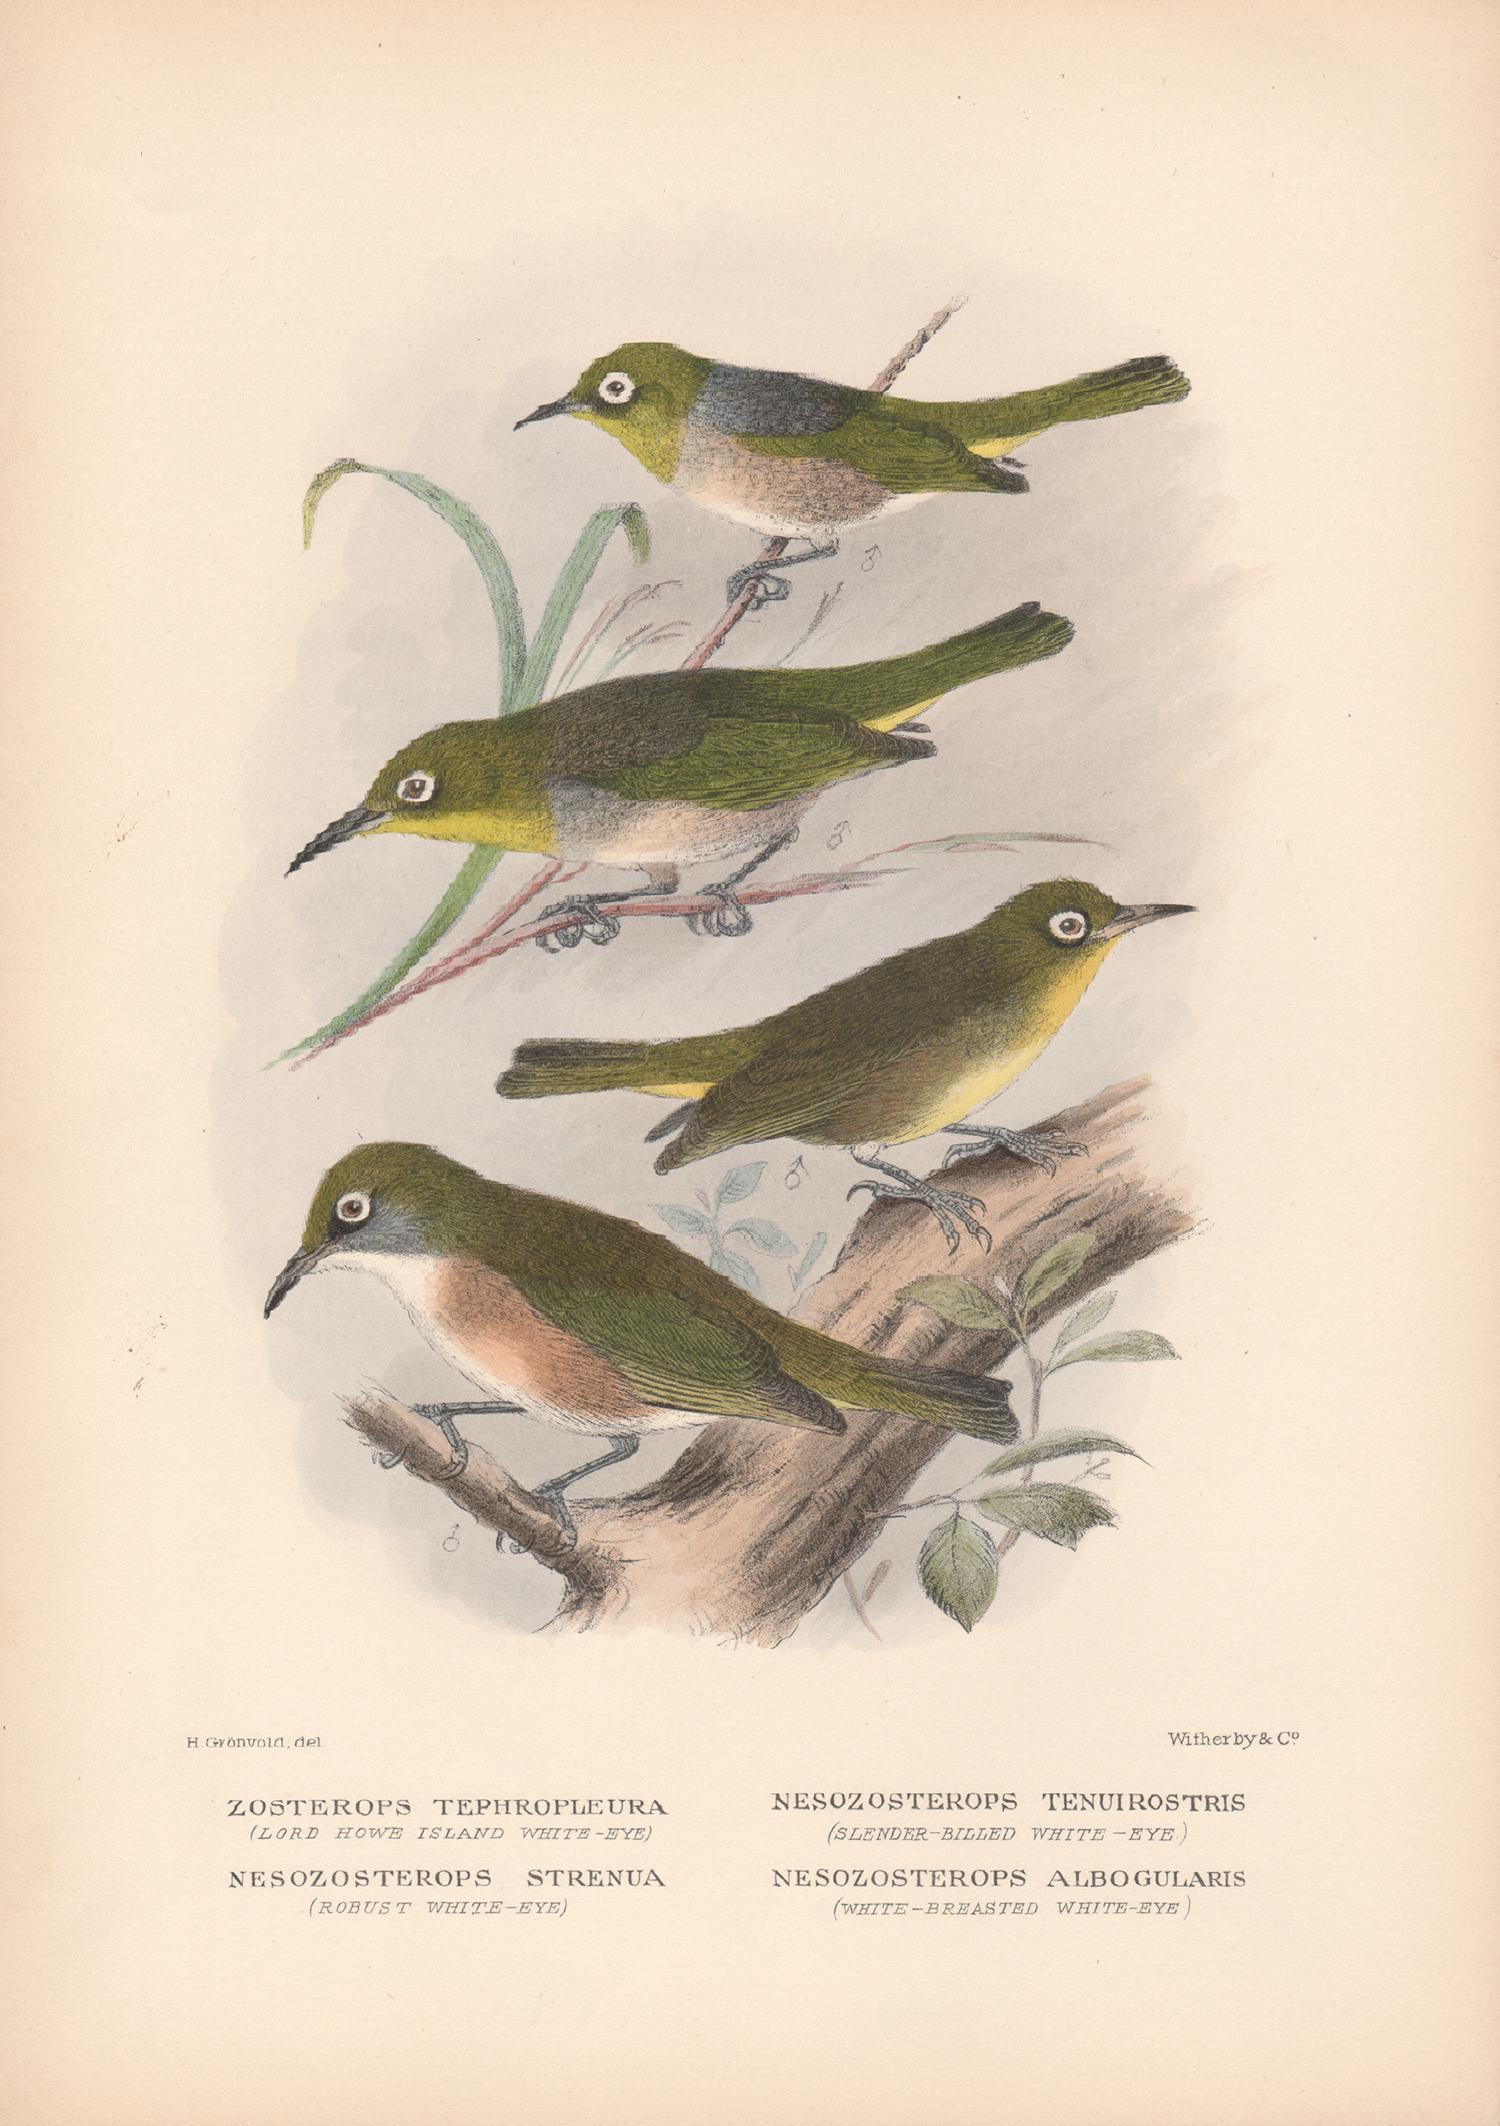 Lord Howe Island White-Eye and others, Bird lithograph with hand-colouring, 1928